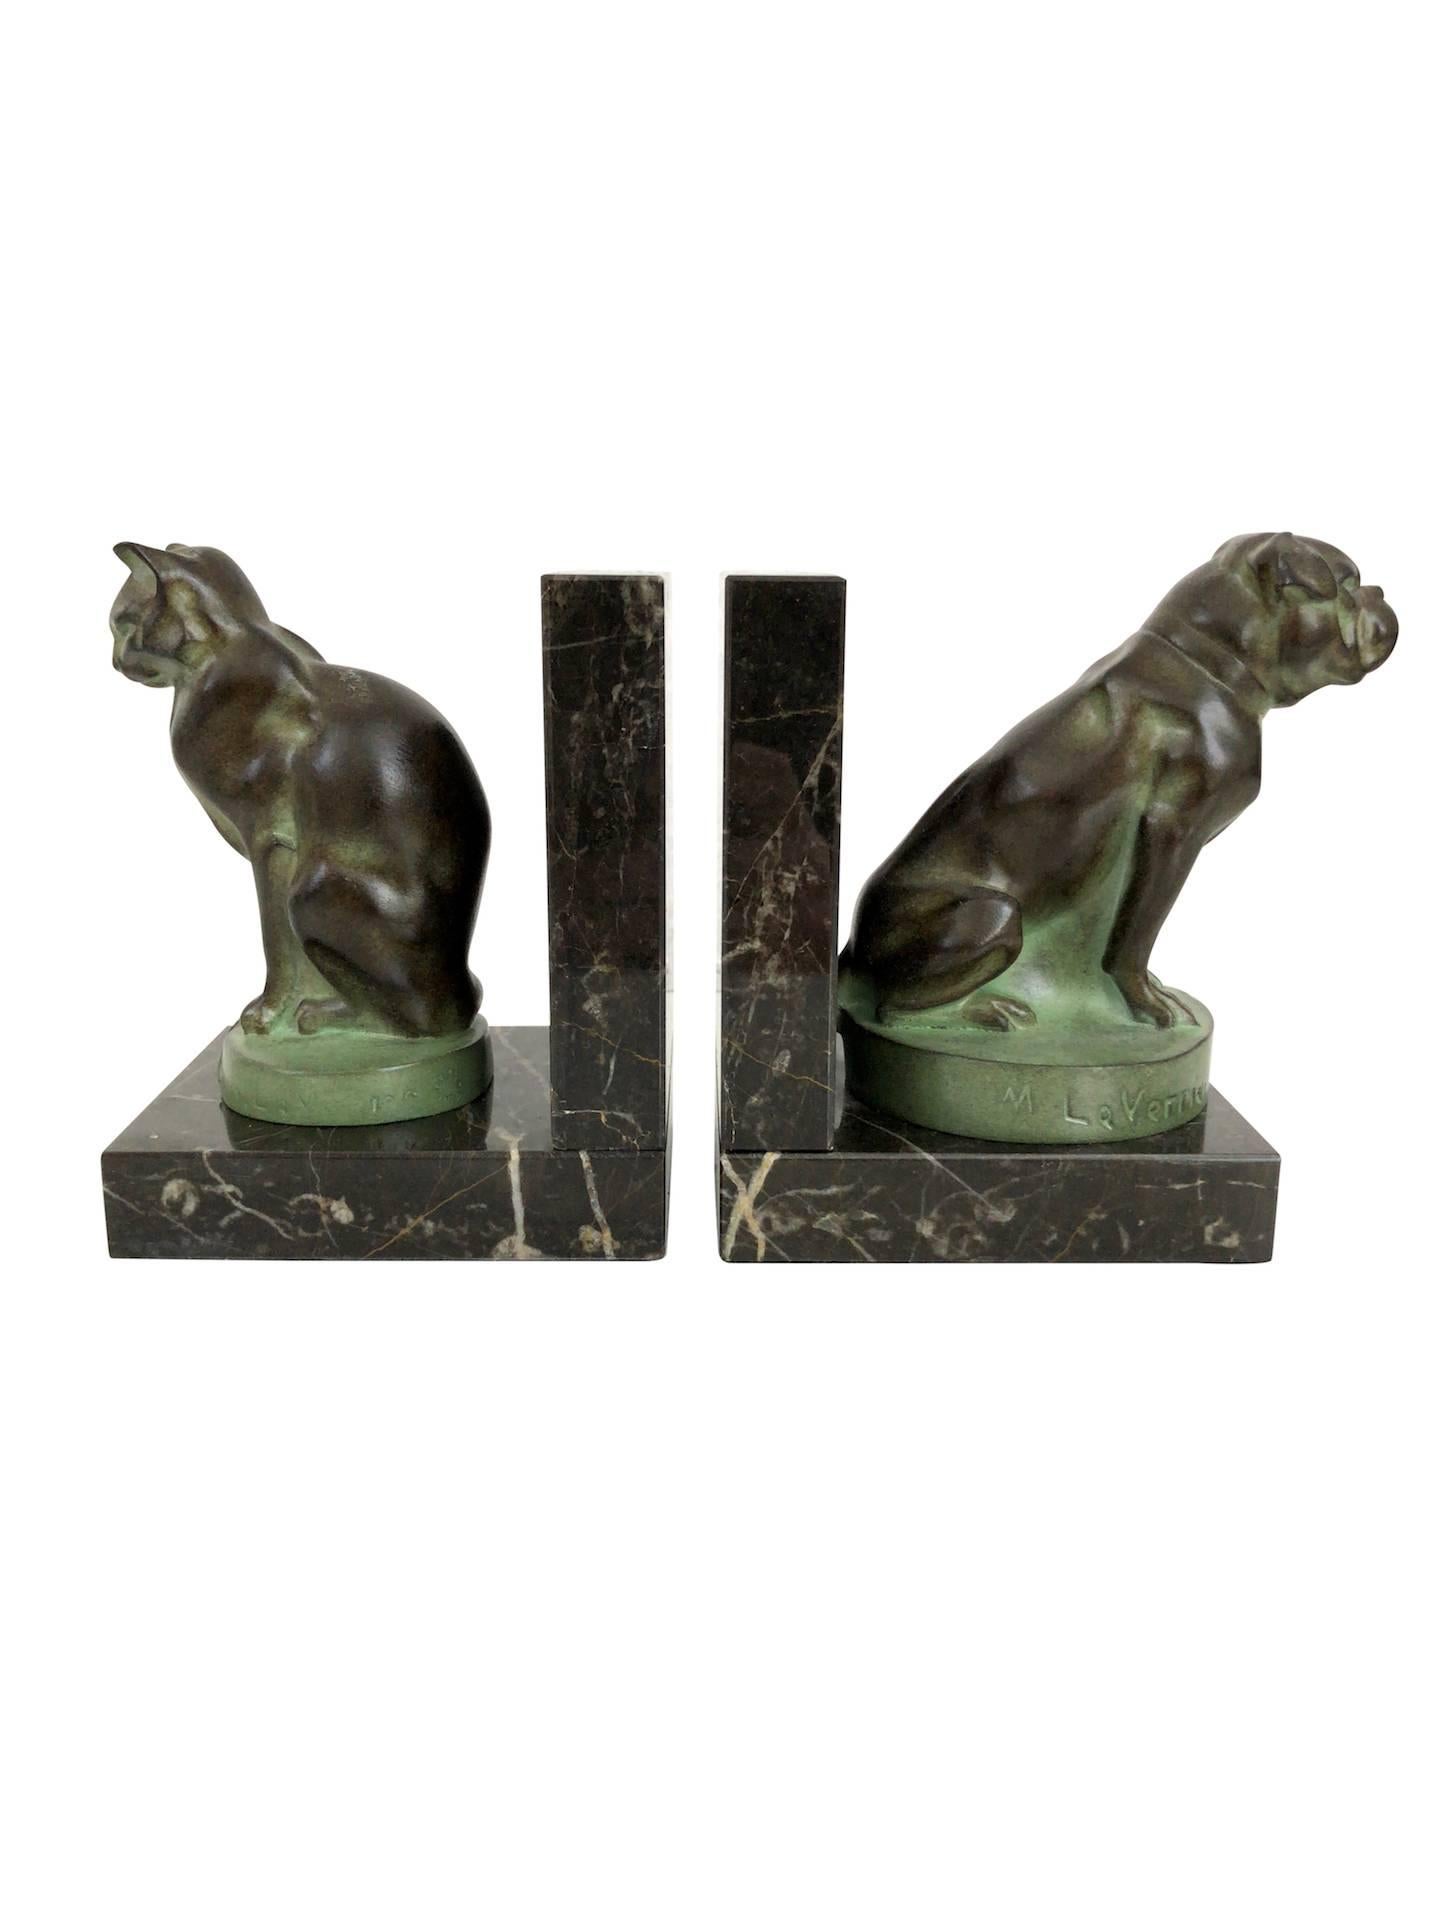 “Chat et Dogue” (cat and dog)
Original “Max Le Verrier”, signed 
Art Deco style, France

Materials: patinated spelter (French: régule), marble base
Socle could have a different marbleization than the picture
Green patina - handwork, patina